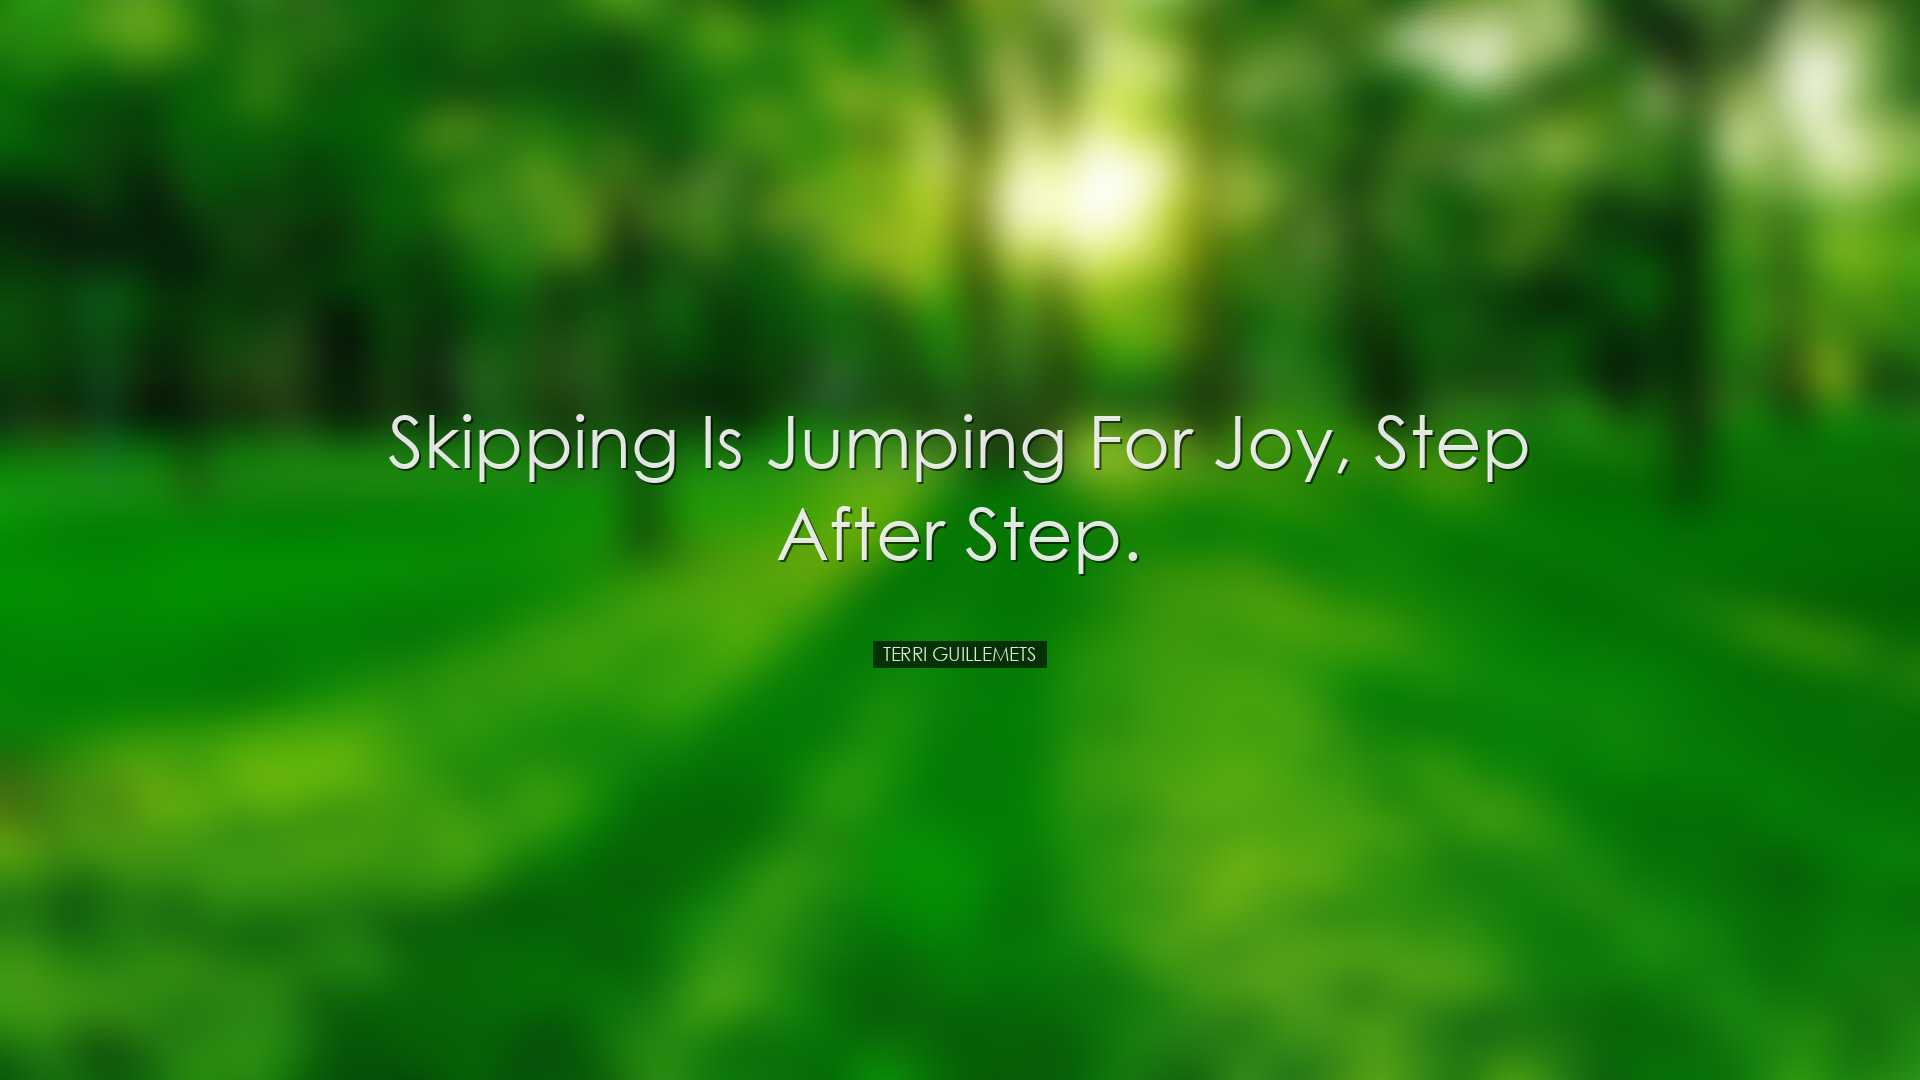 Skipping is jumping for joy, step after step. - Terri Guillemets